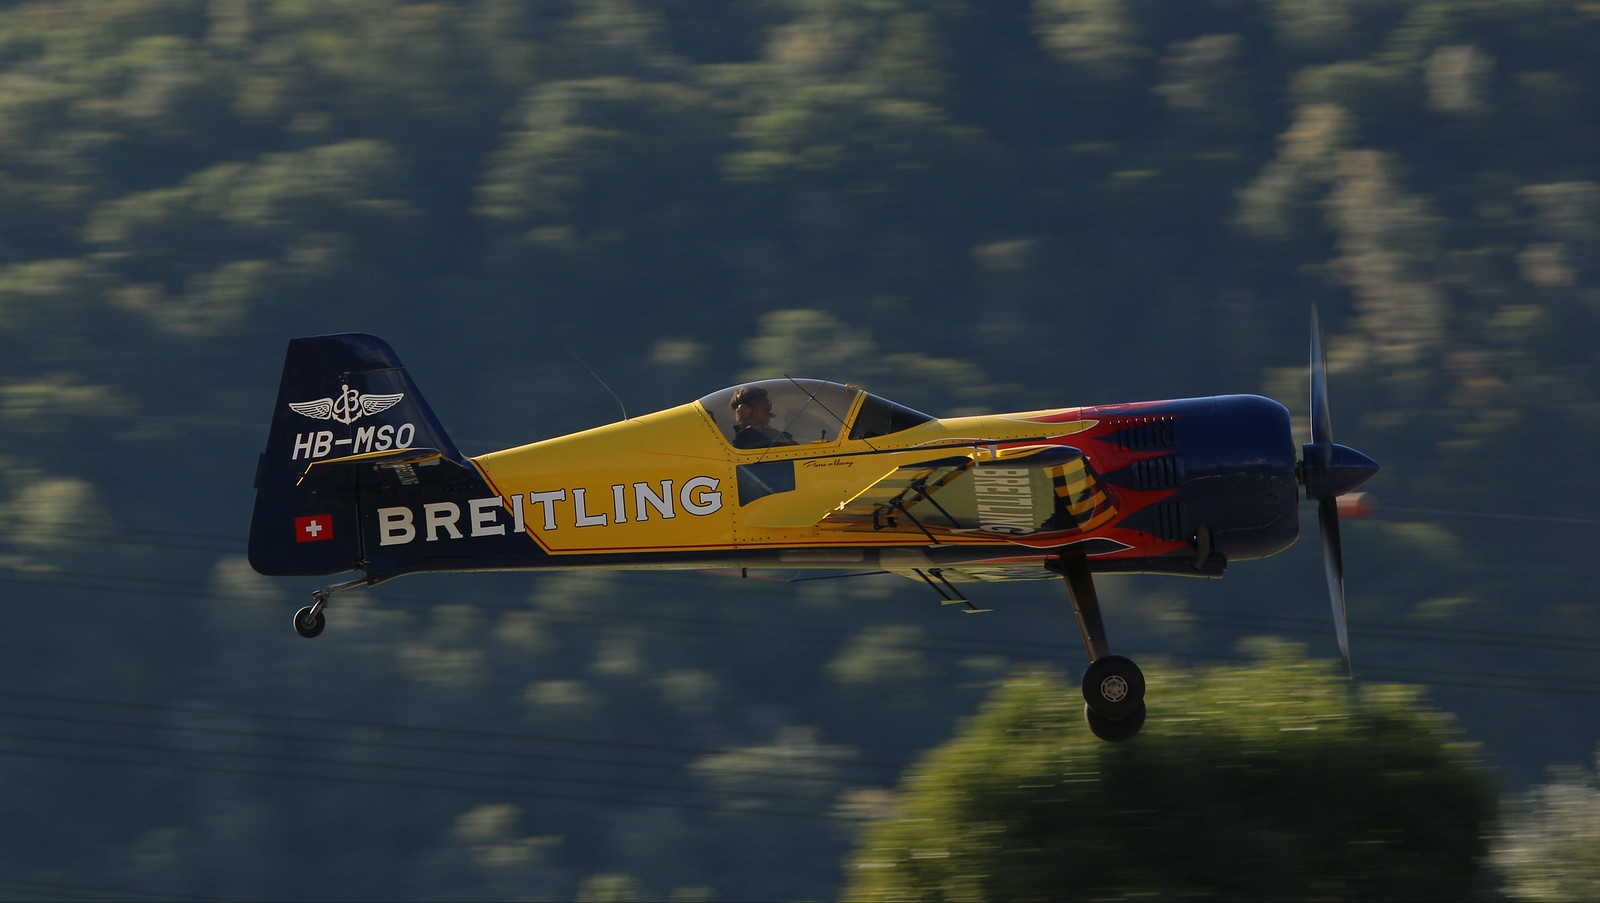 Breitling Sion Airshow 2017 38847584305_d218a76454_h